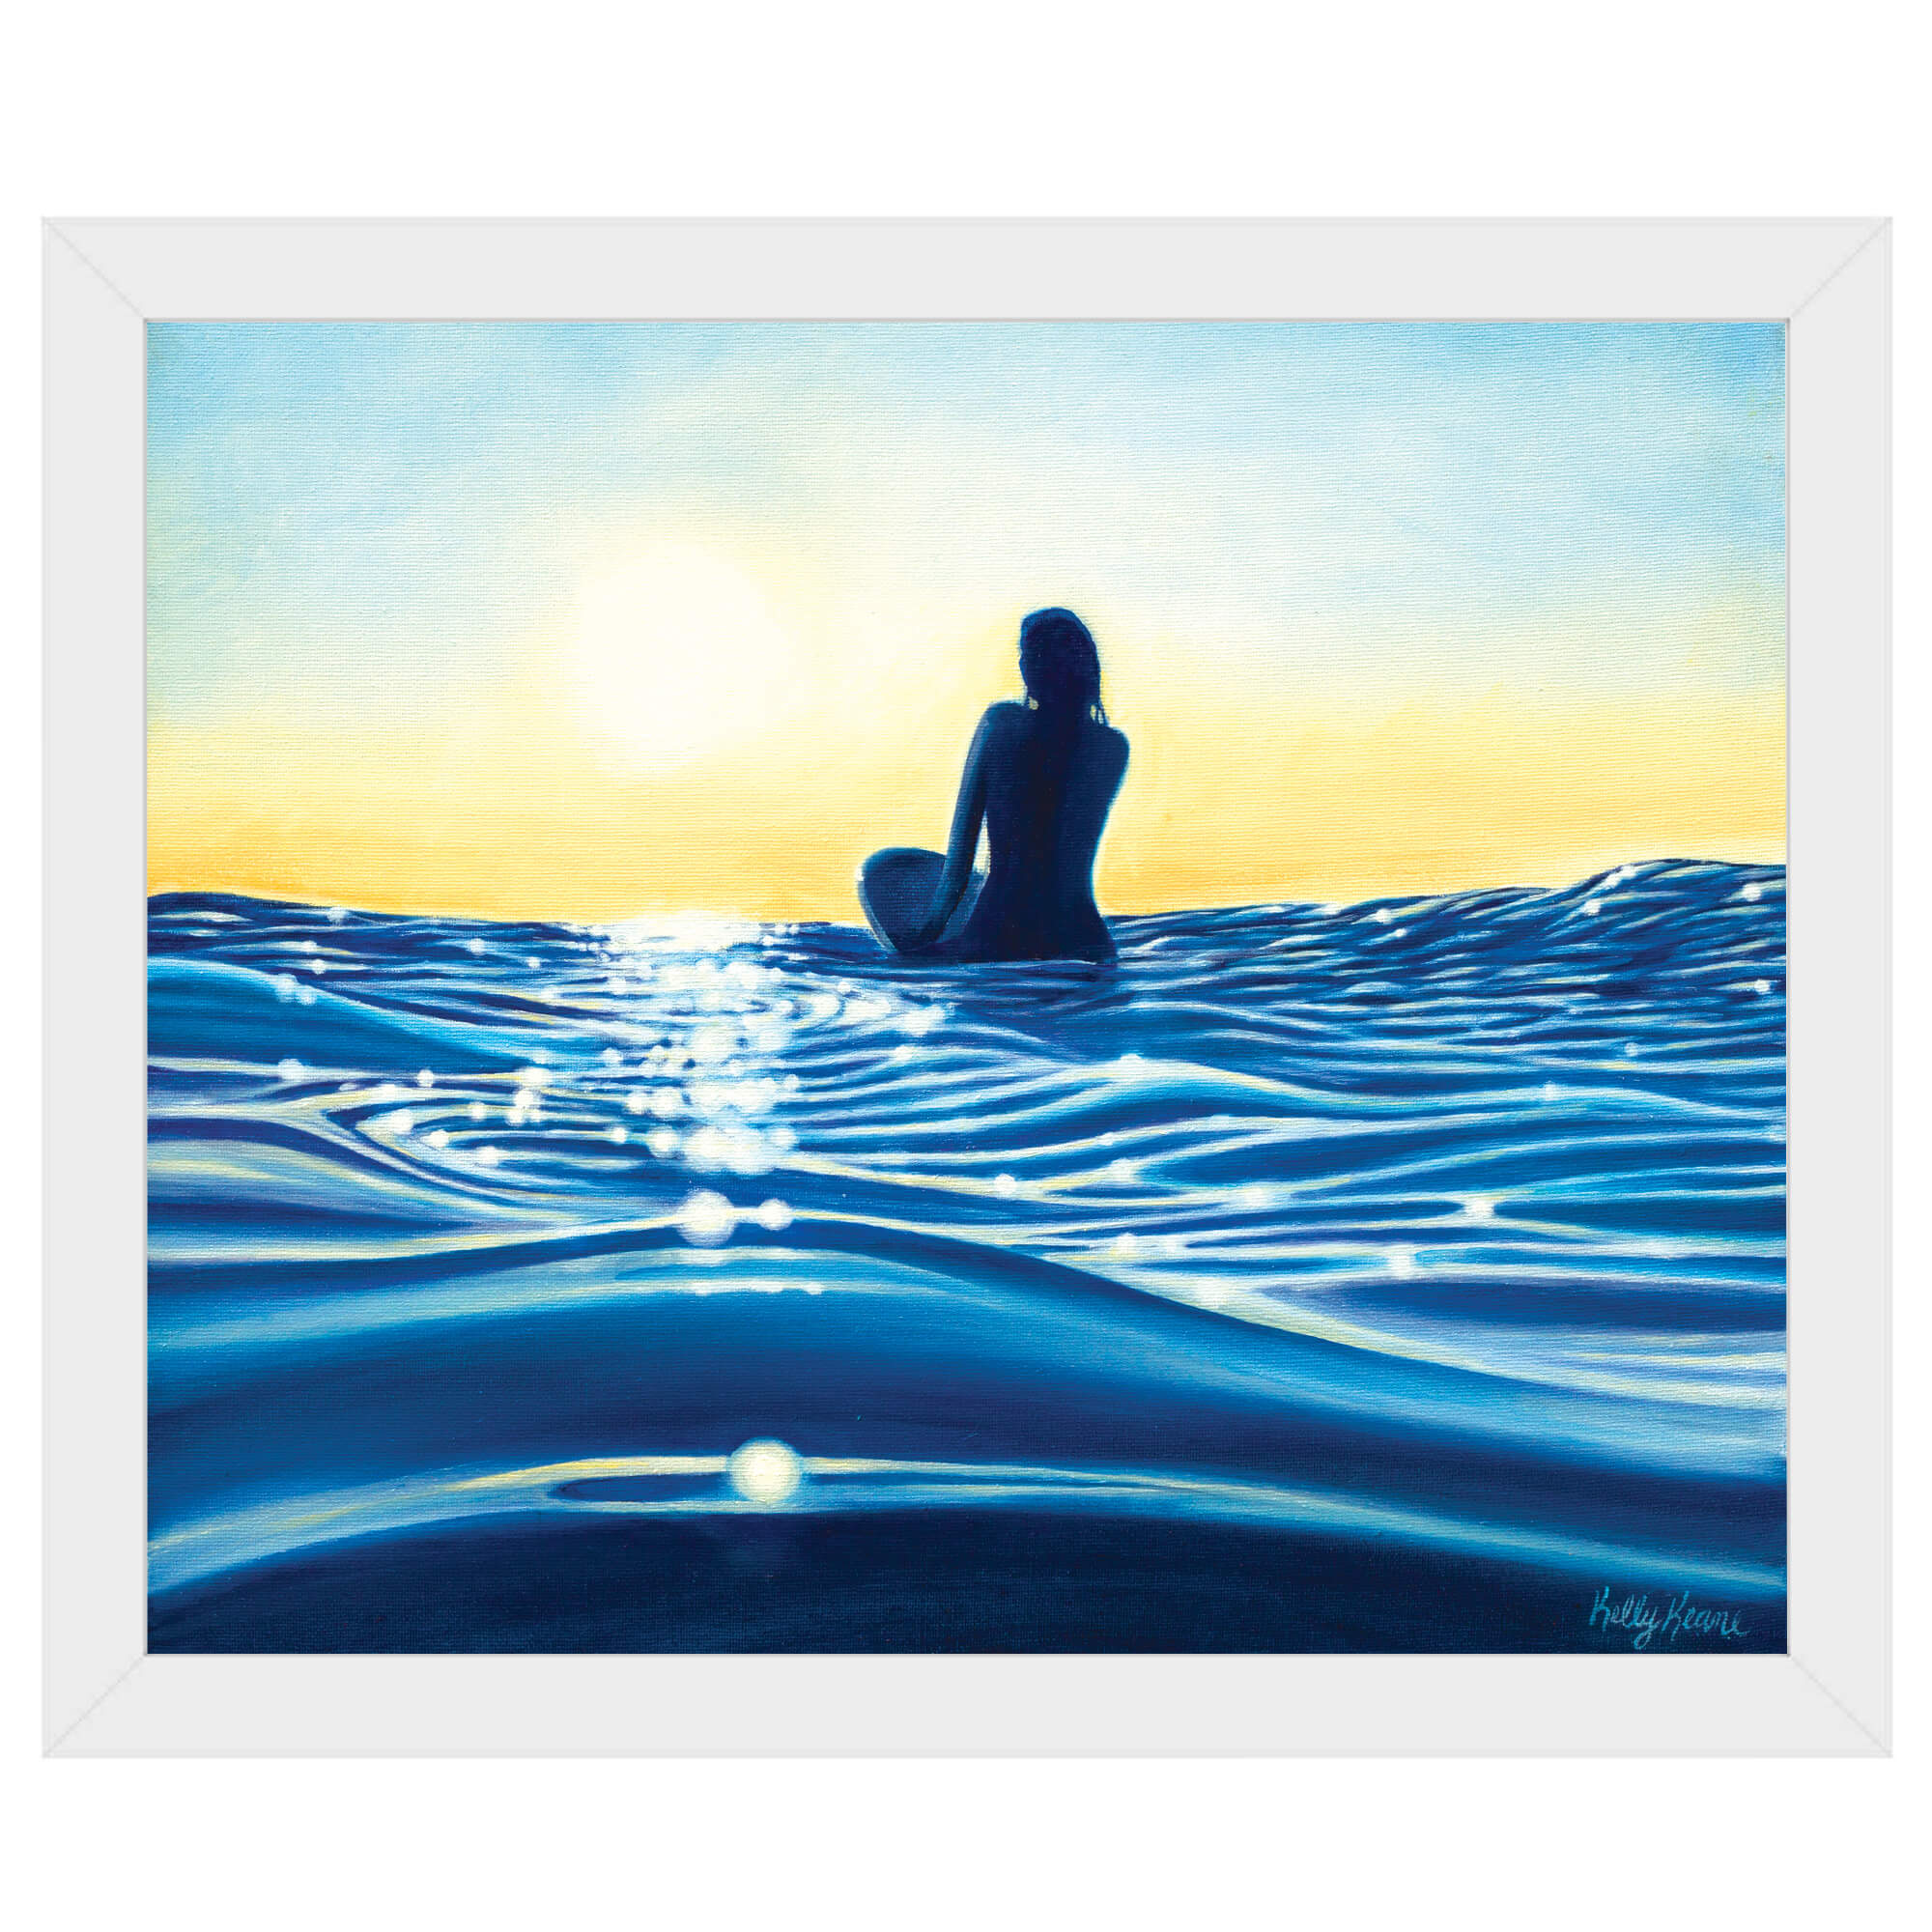 Paper art print with white frame showcasing a woman sitting on her surf board while appreciating the beautiful view  by hawaii artist Kelly Keane